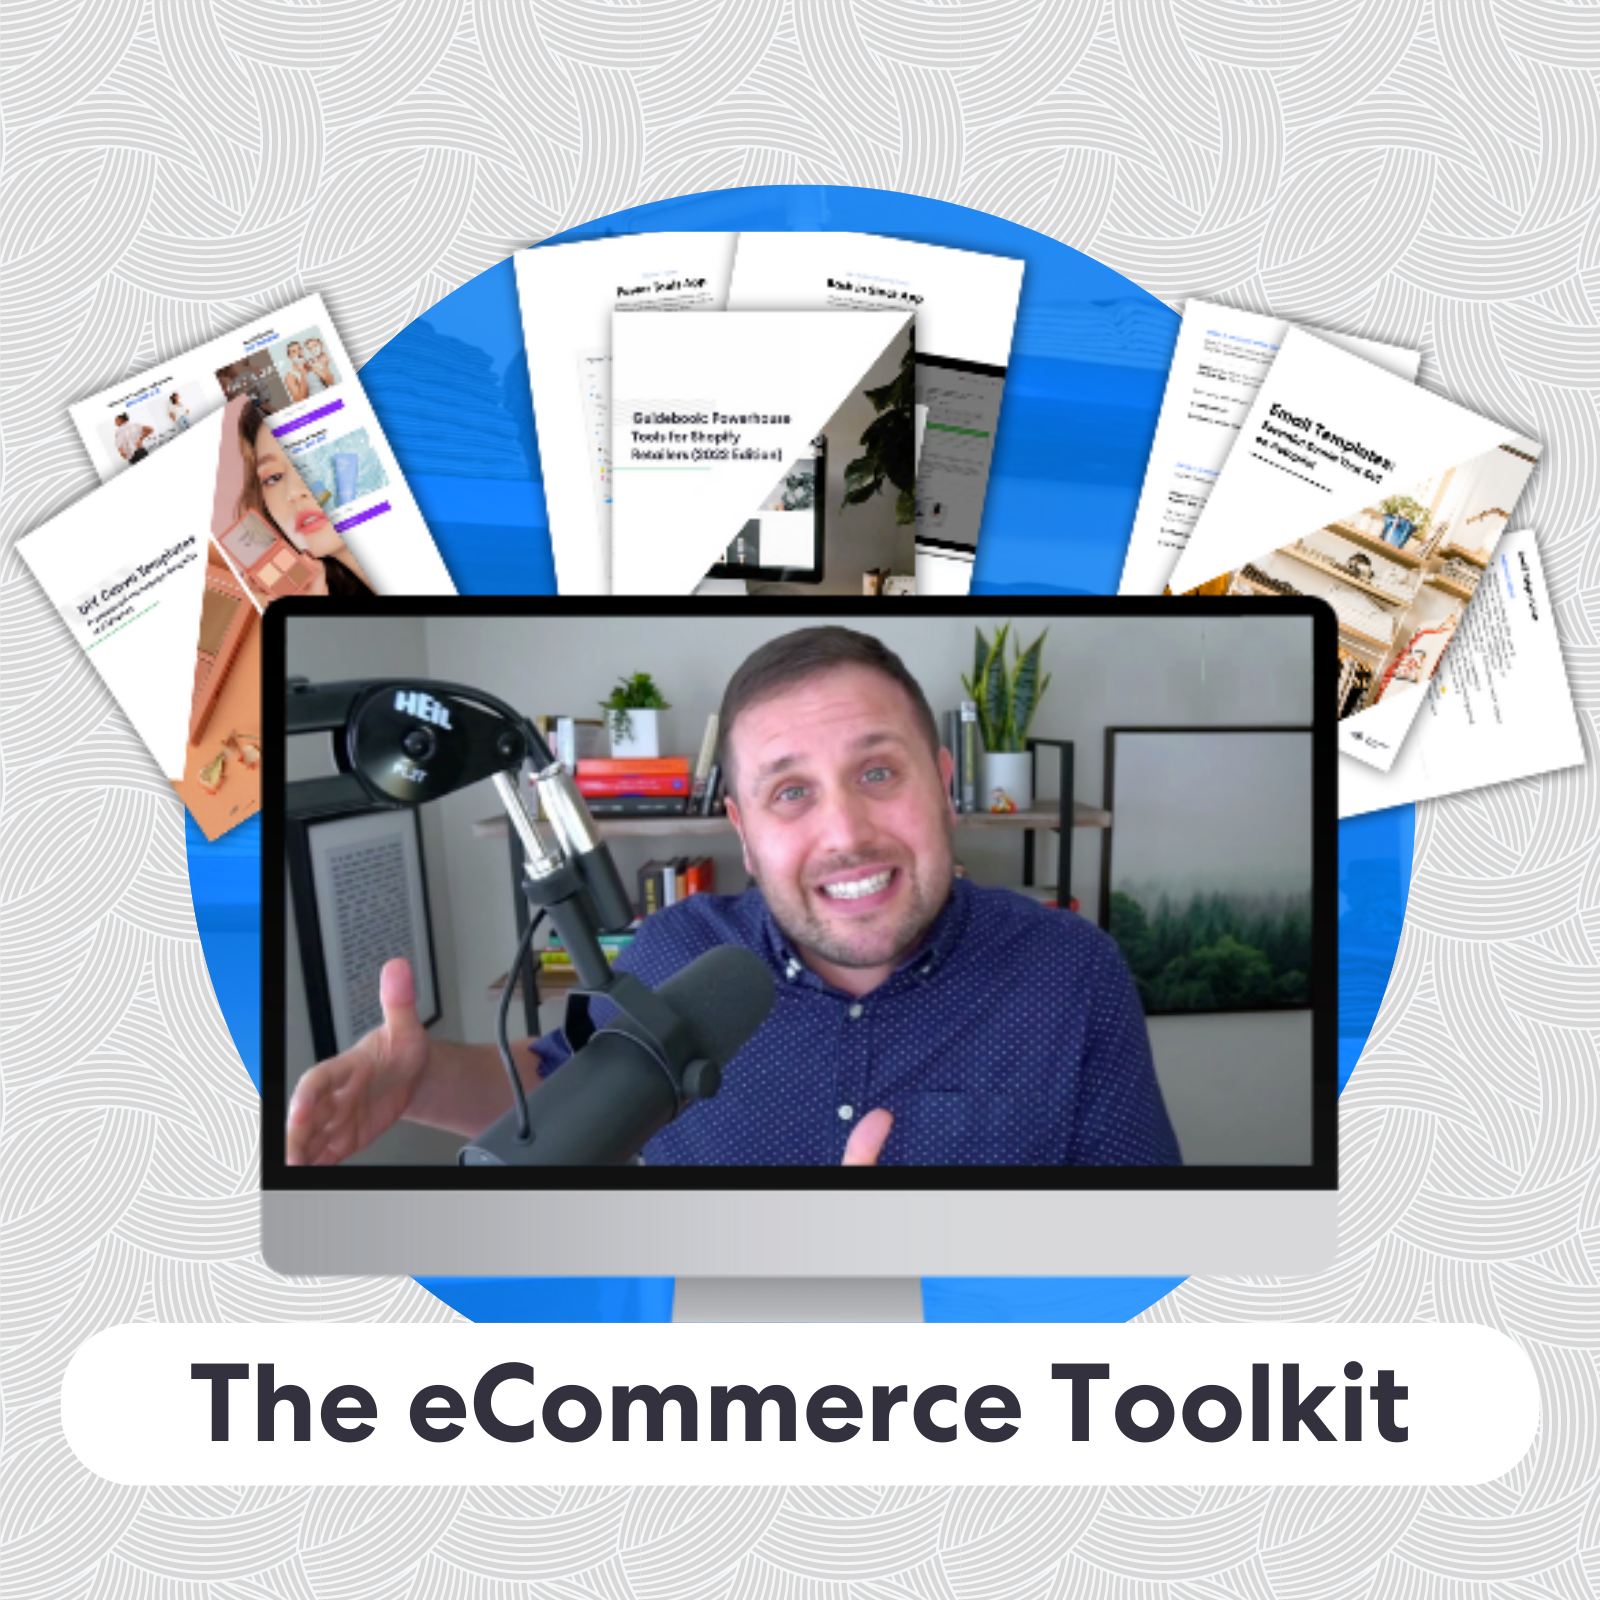 The eCommerce Toolkit